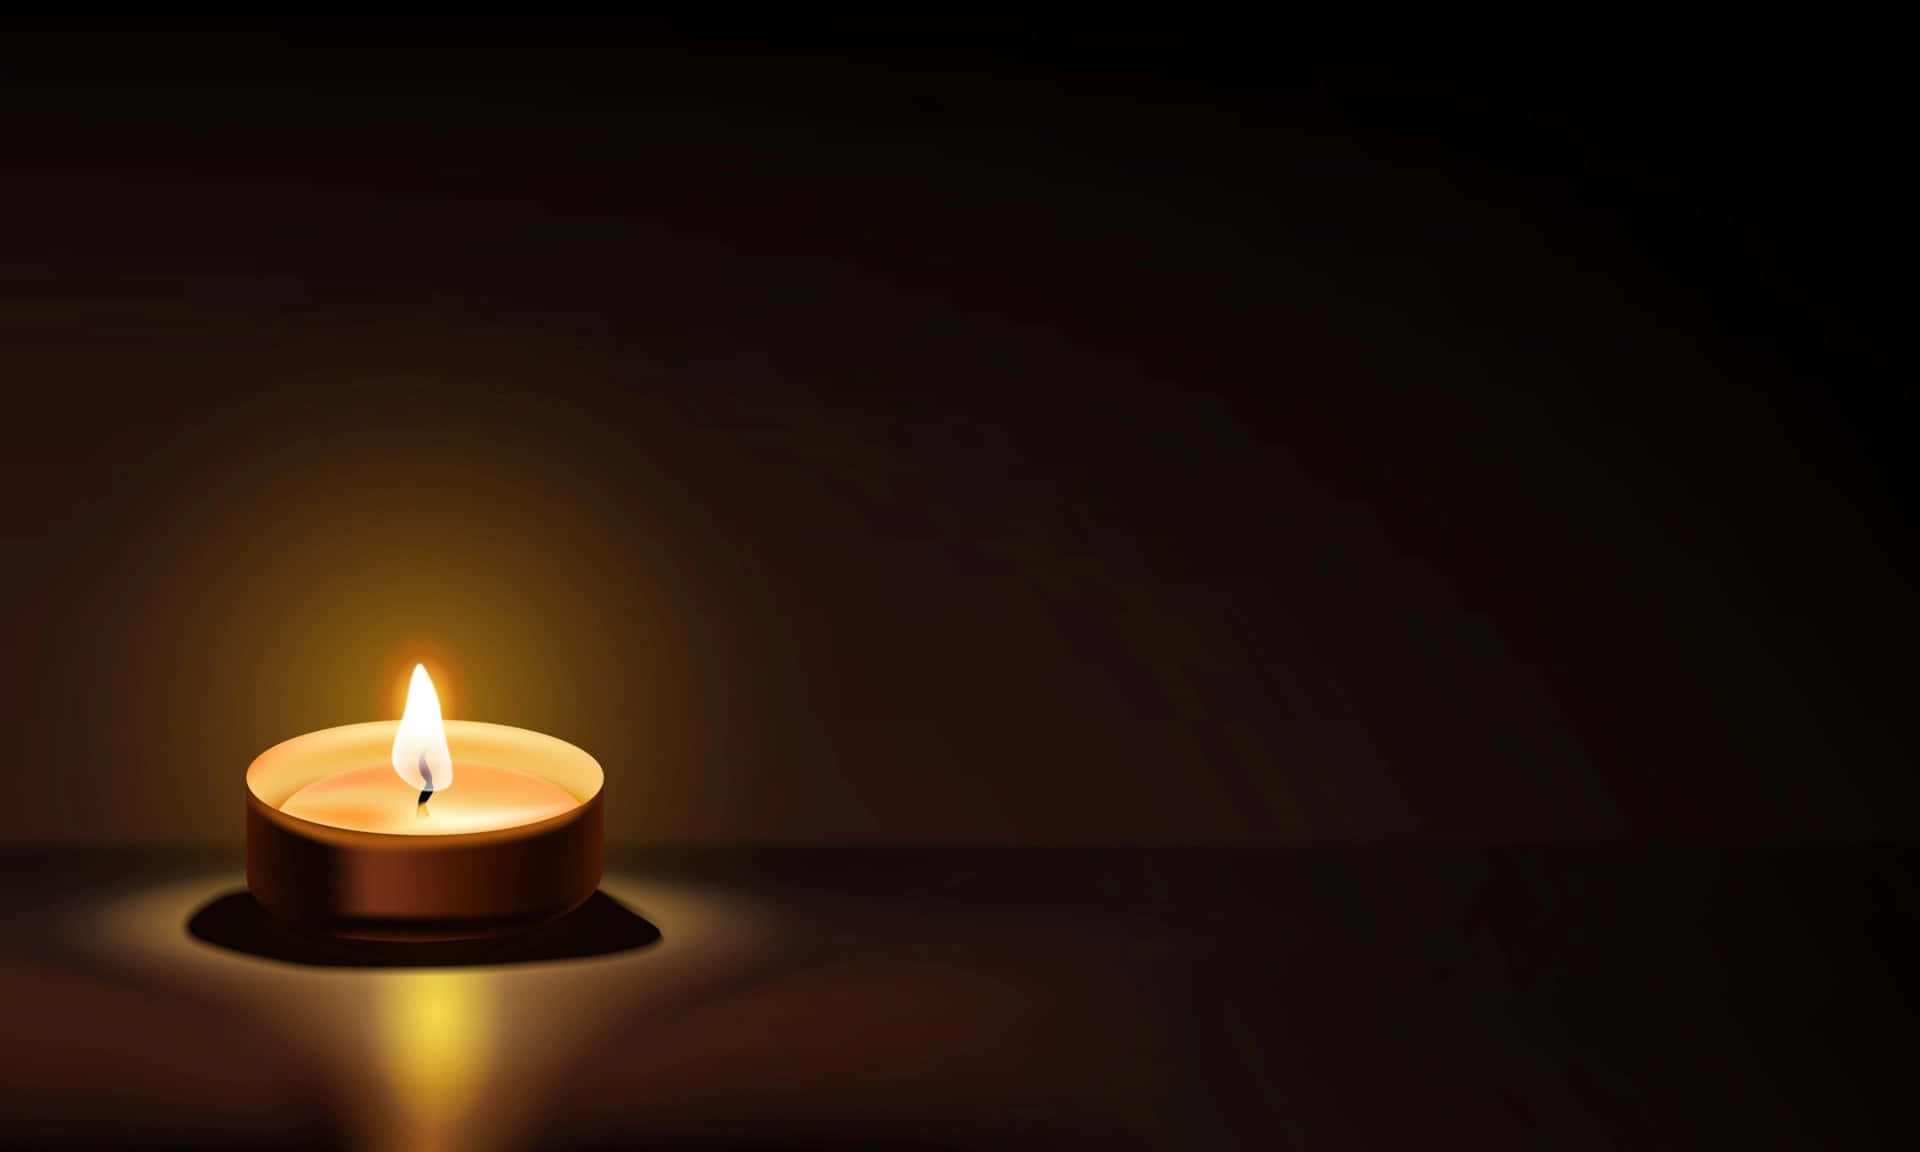 A Candle Is Lit On A Dark Background